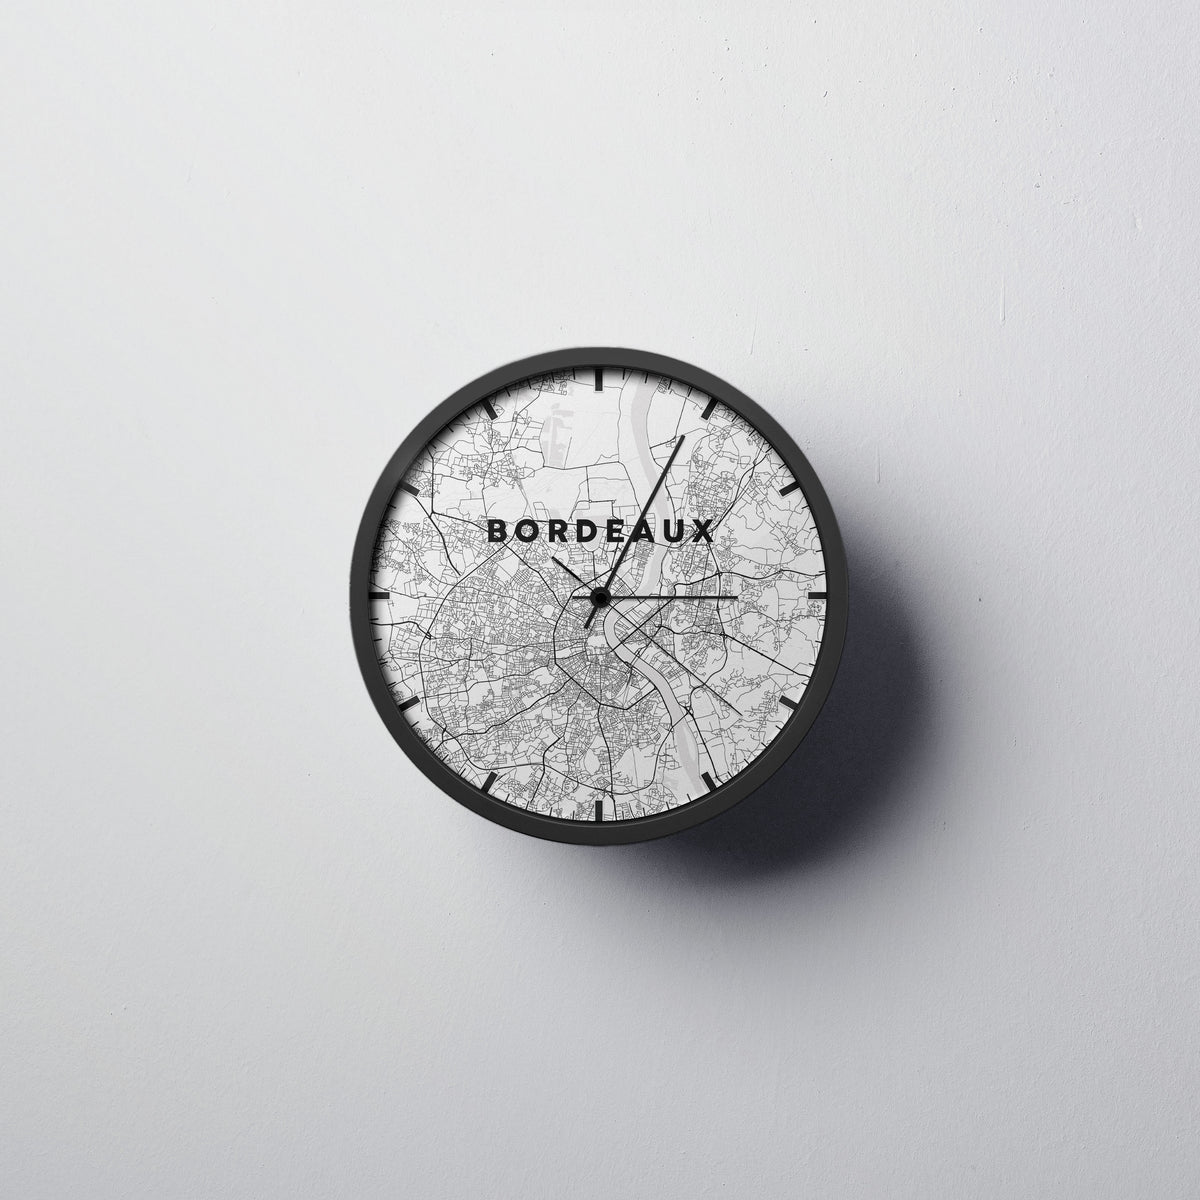 Bordeaux Wall Clock - Point Two Design